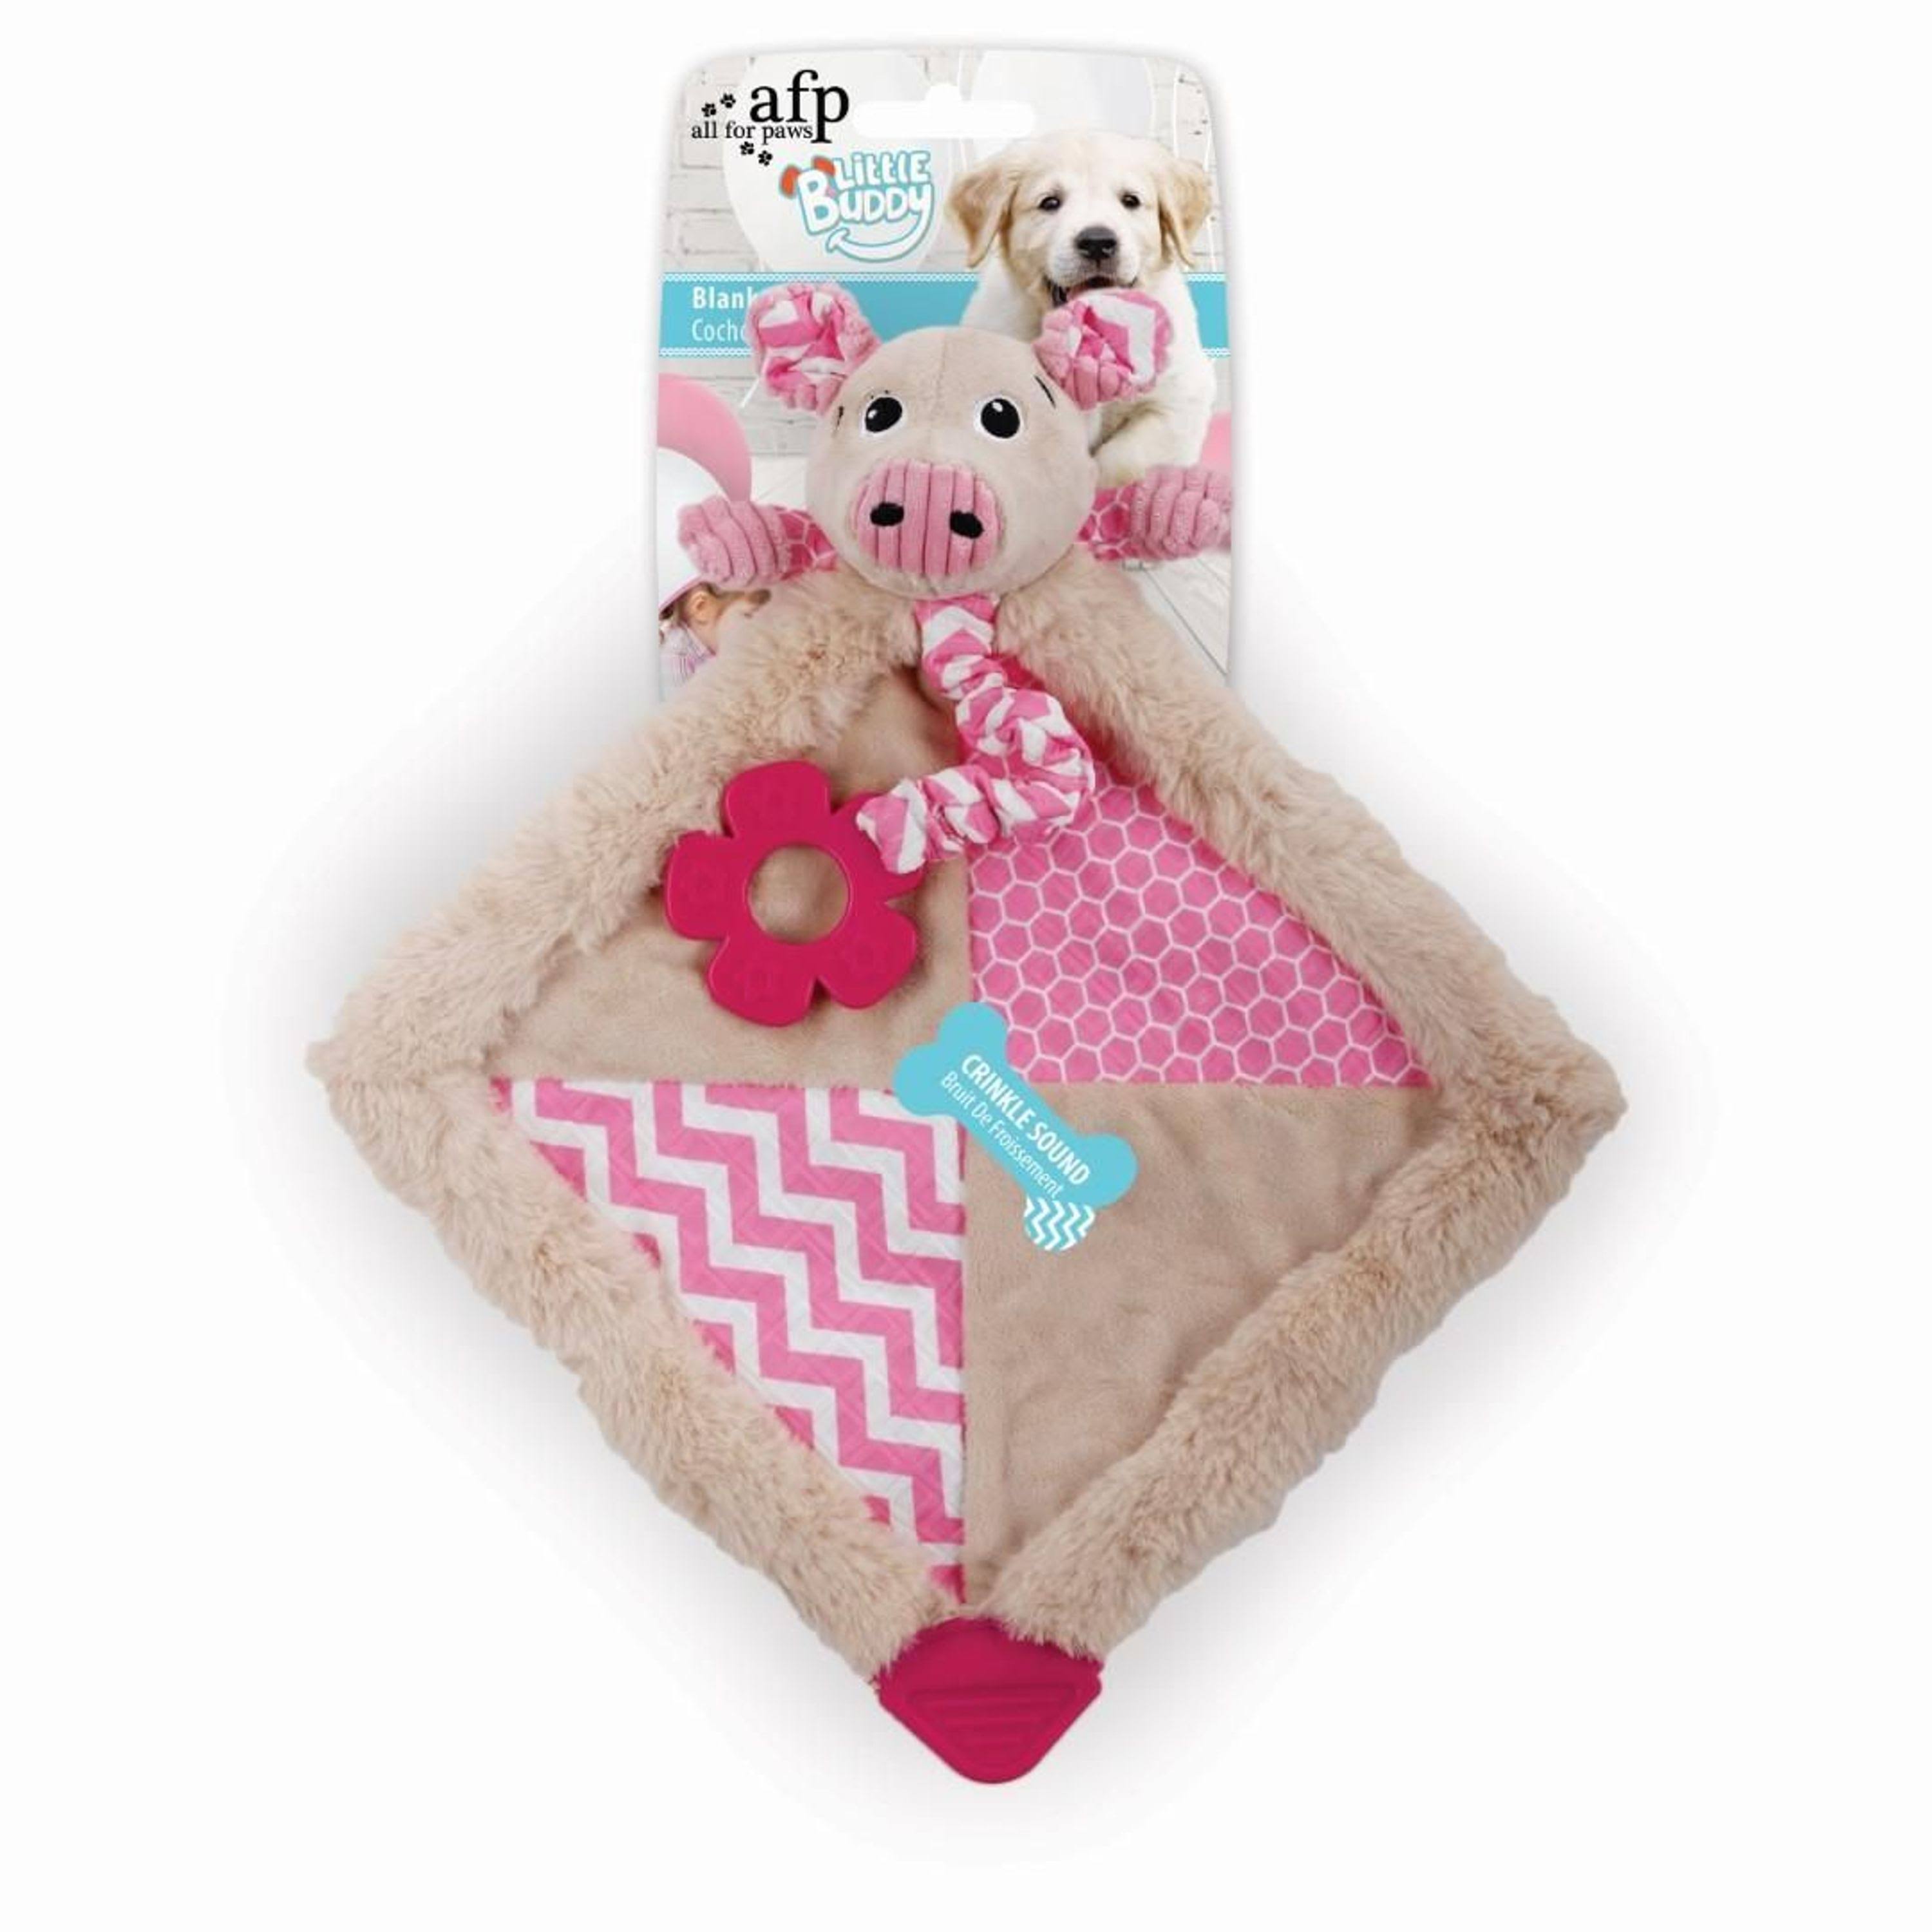 All For Paws Little Buddy Blanky Piggy - 31250